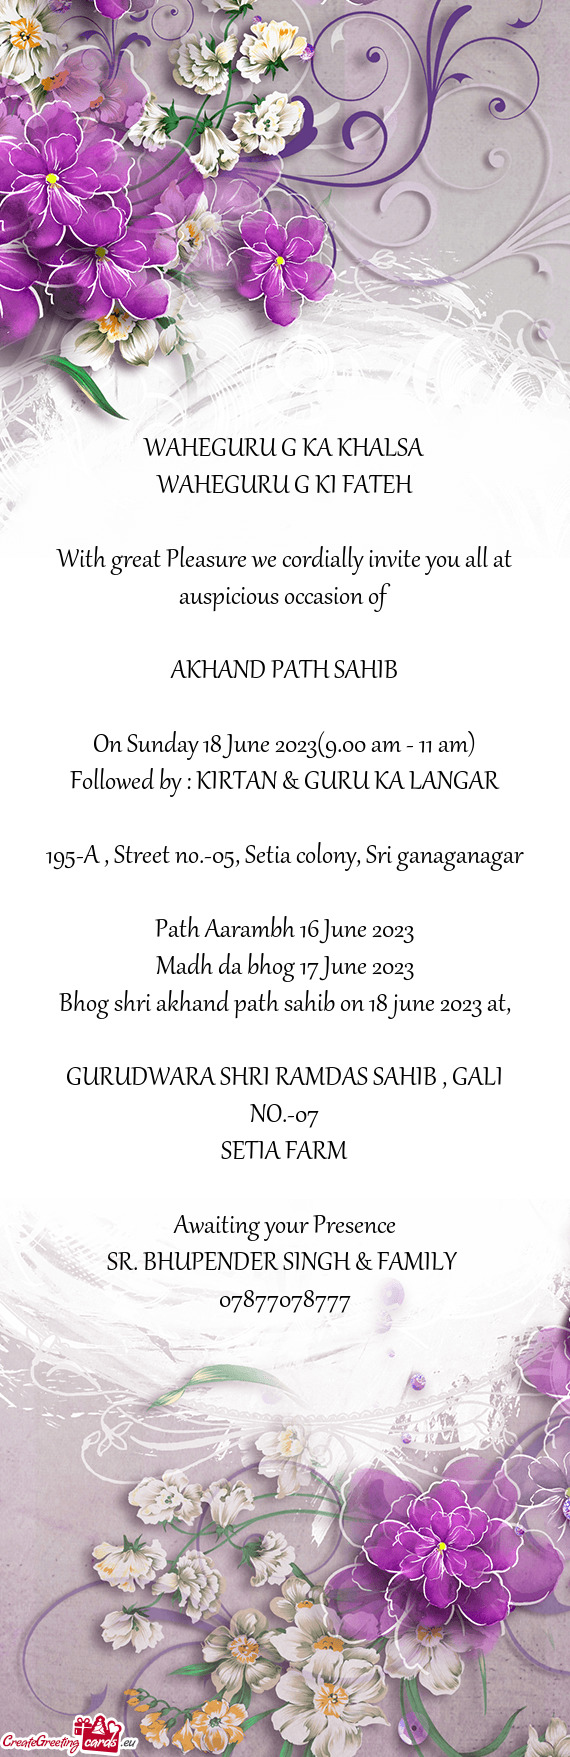 With great Pleasure we cordially invite you all at auspicious occasion of